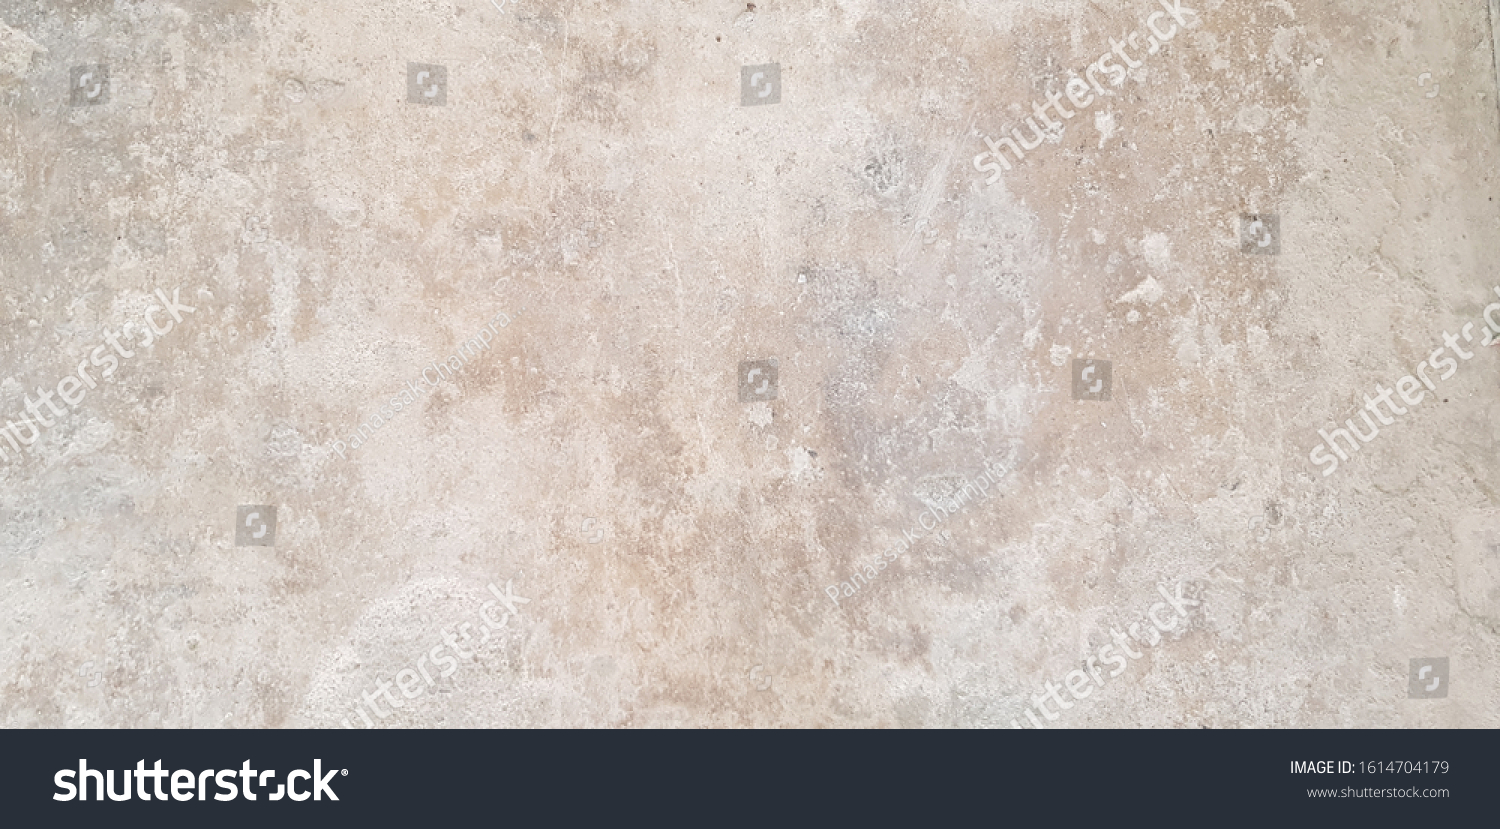 Old grungy texture,Concrete wall,Cement floor #1614704179